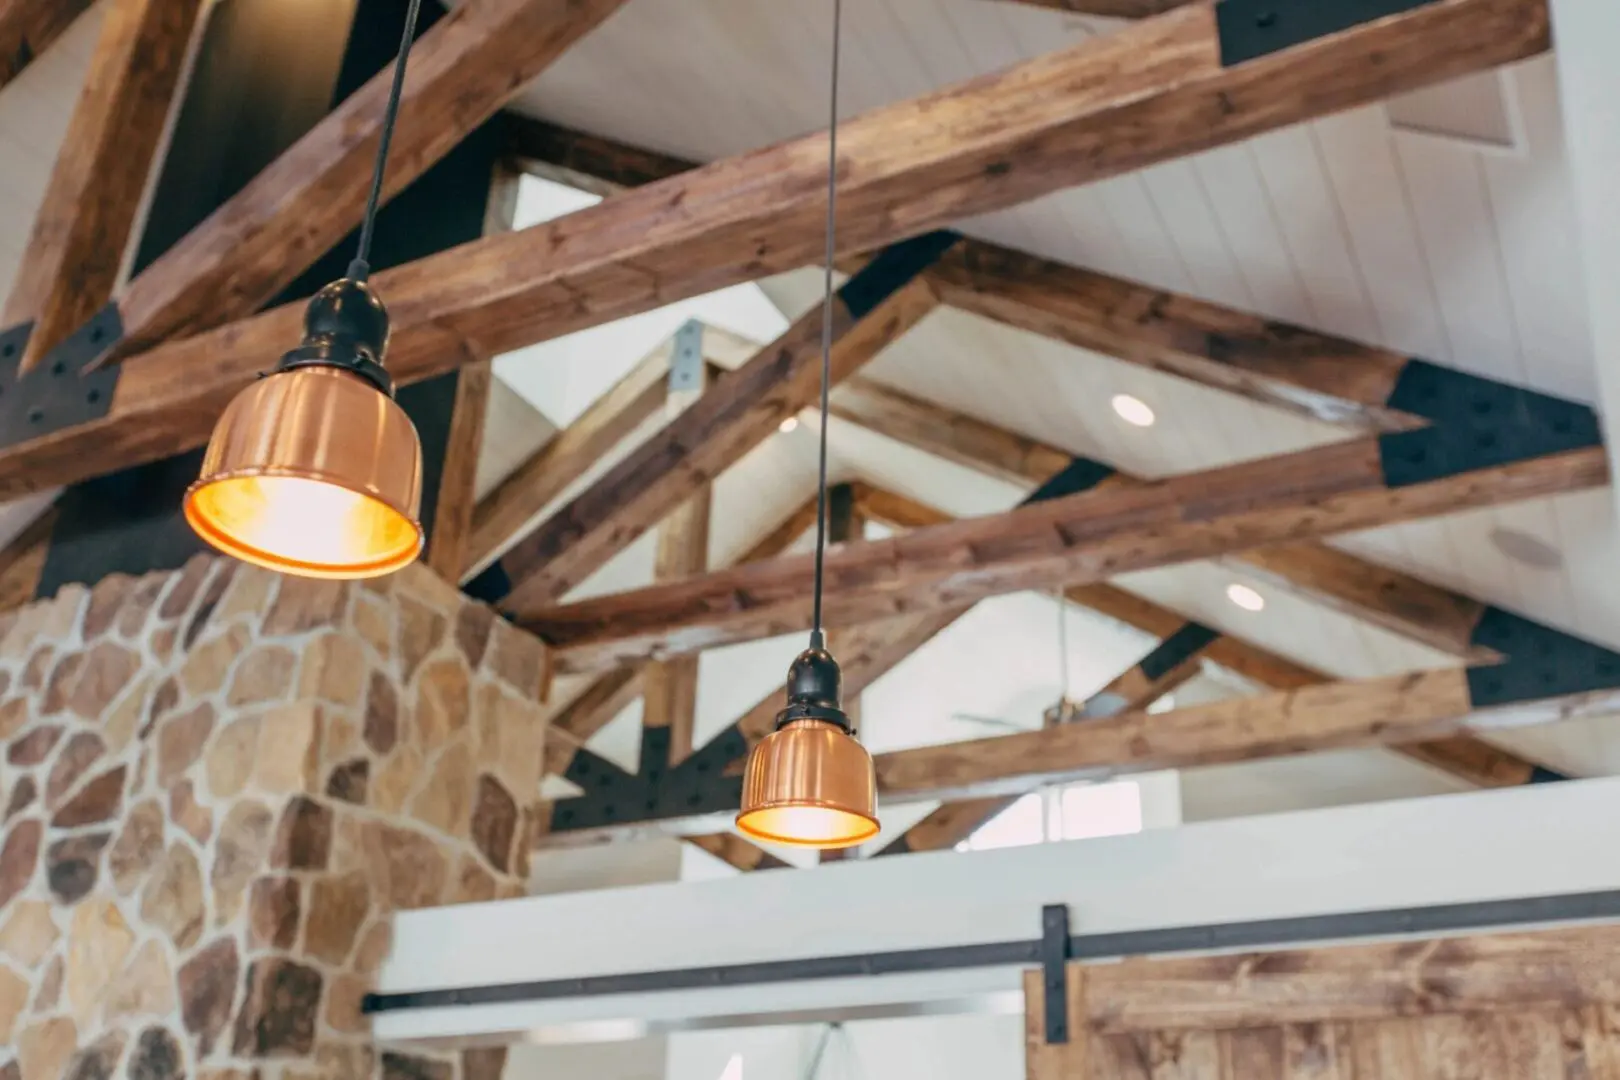 Hanging ceiling lights if a rustic home